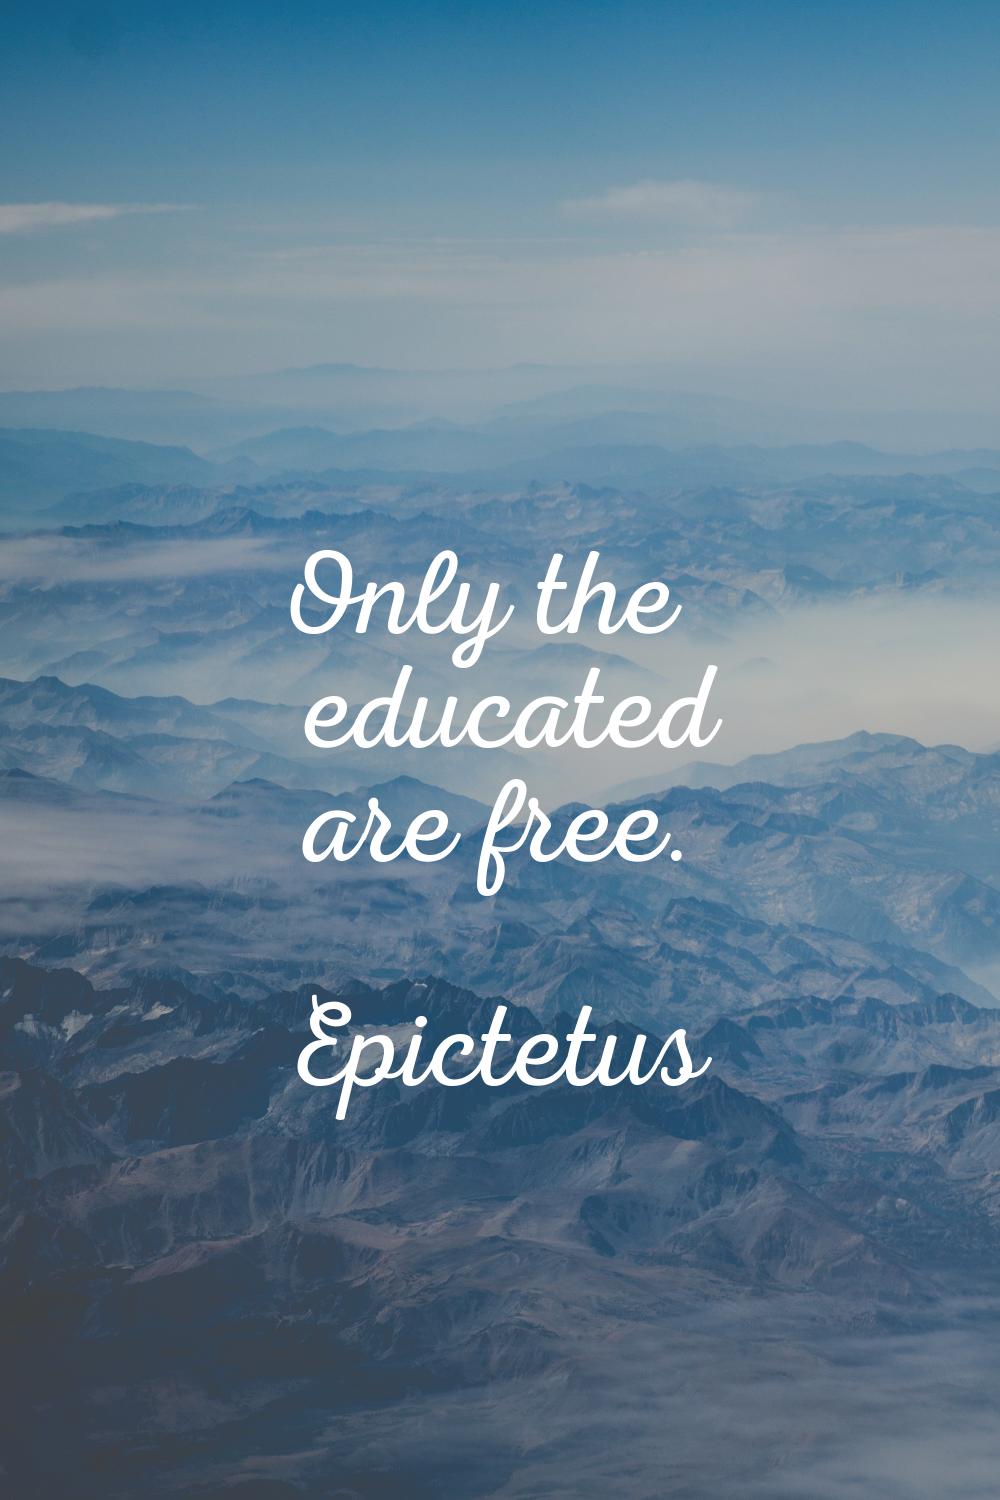 Only the educated are free.